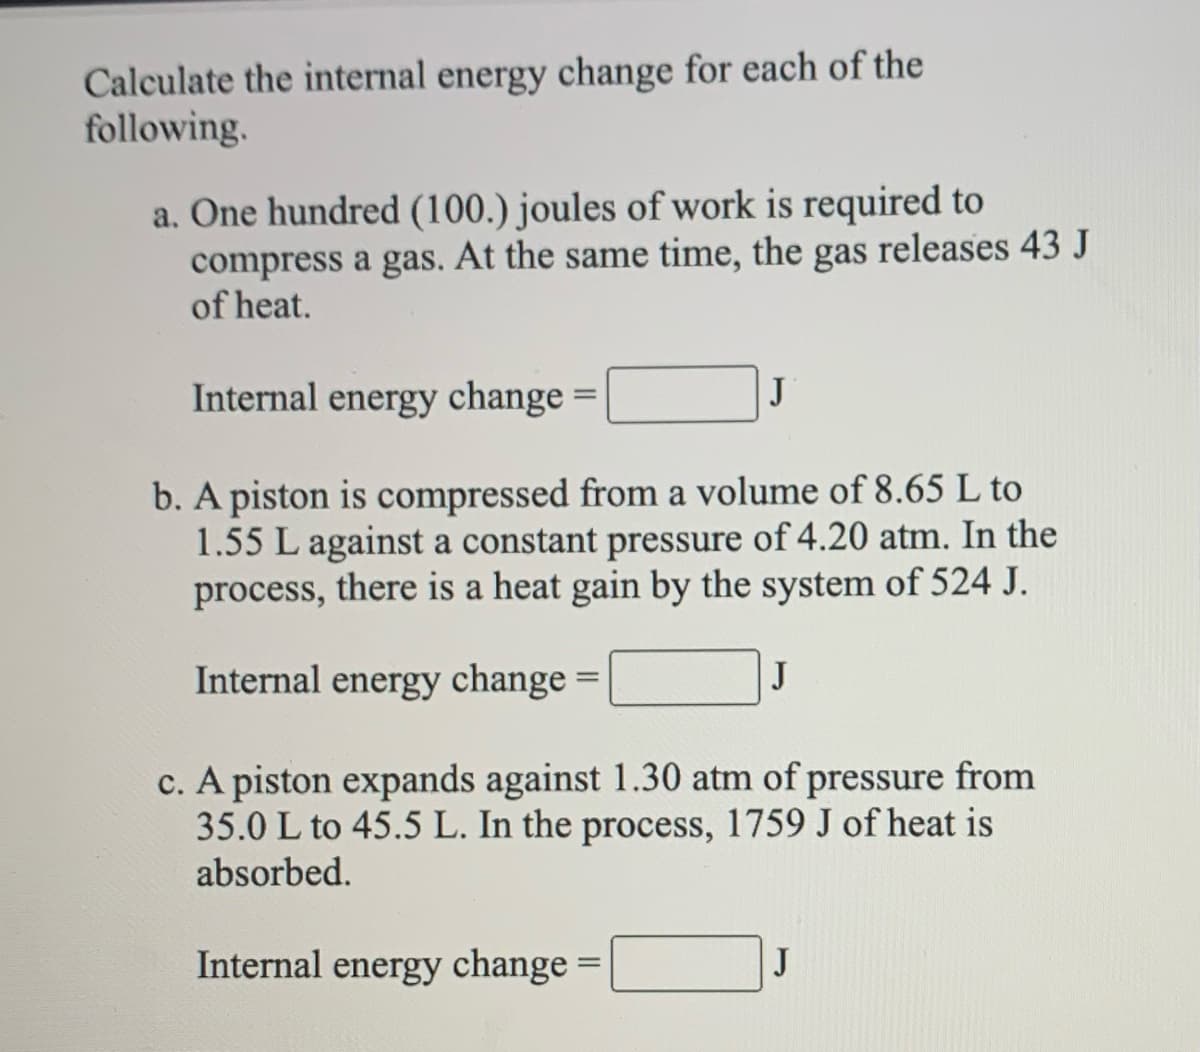 Calculate the internal energy change for each of the
following.
a. One hundred (100.) joules of work is required to
compress a gas. At the same time, the gas releases 43 J
of heat.
Internal energy change =
J
b. A piston is compressed from a volume of 8.65 L to
1.55 L against a constant pressure of 4.20 atm. In the
process, there is a heat gain by the system of 524 J.
Internal energy change =
J
c. A piston expands against 1.30 atm of pressure from
35.0 L to 45.5 L. In the process, 1759 J of heat is
absorbed.
Internal energy change =
J
